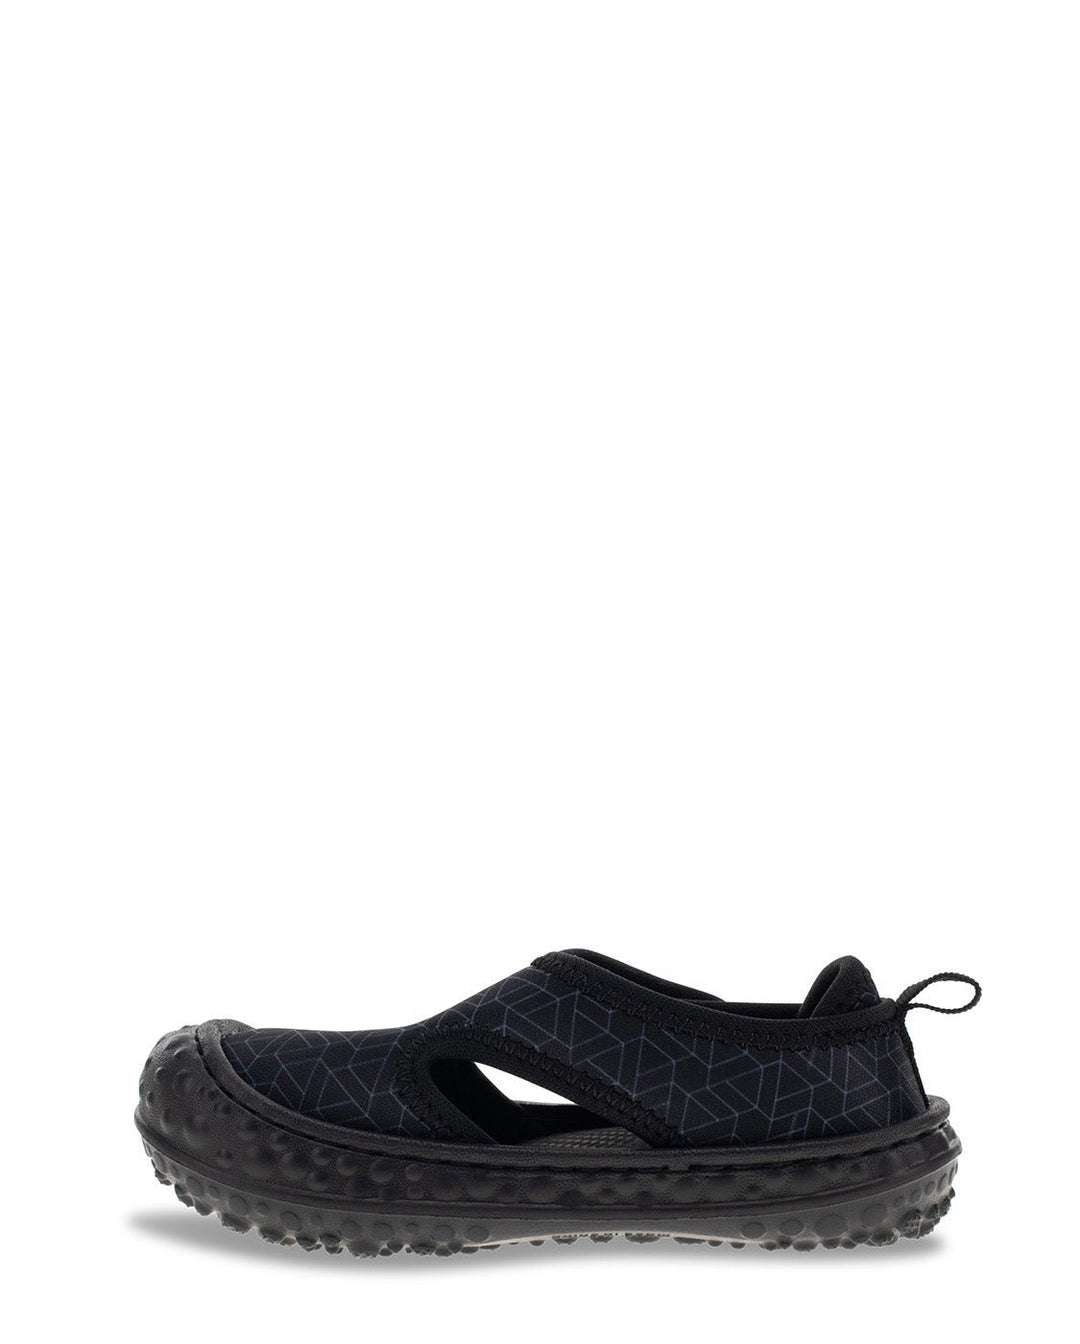 New! Kids Discover Sandal - Black - Western Chief